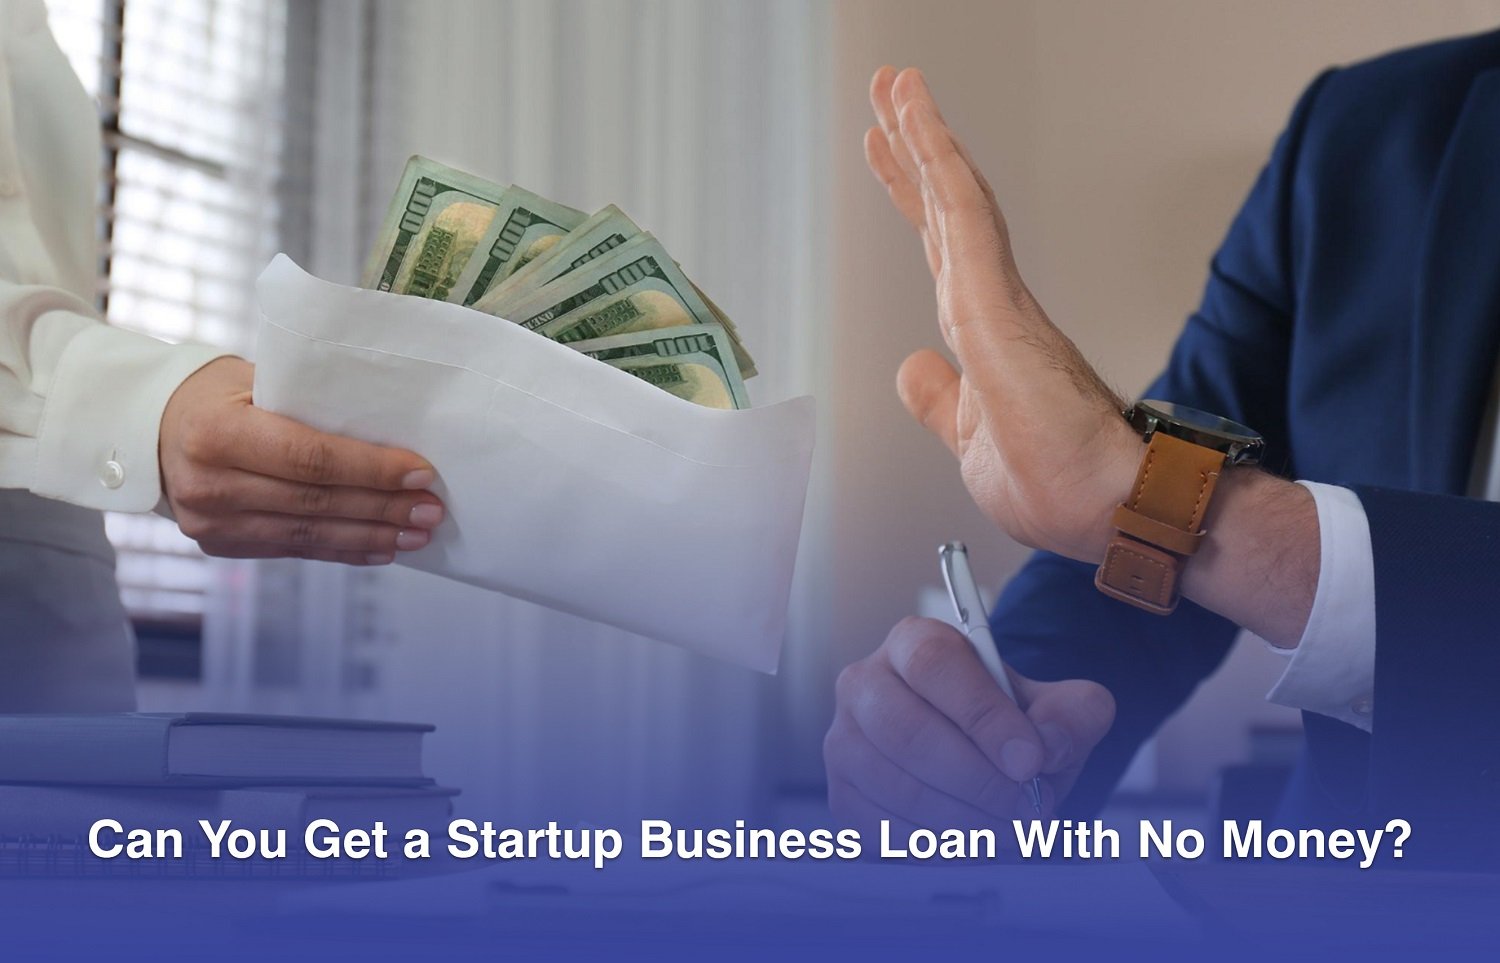 How to get a Startup Business Loan with no money